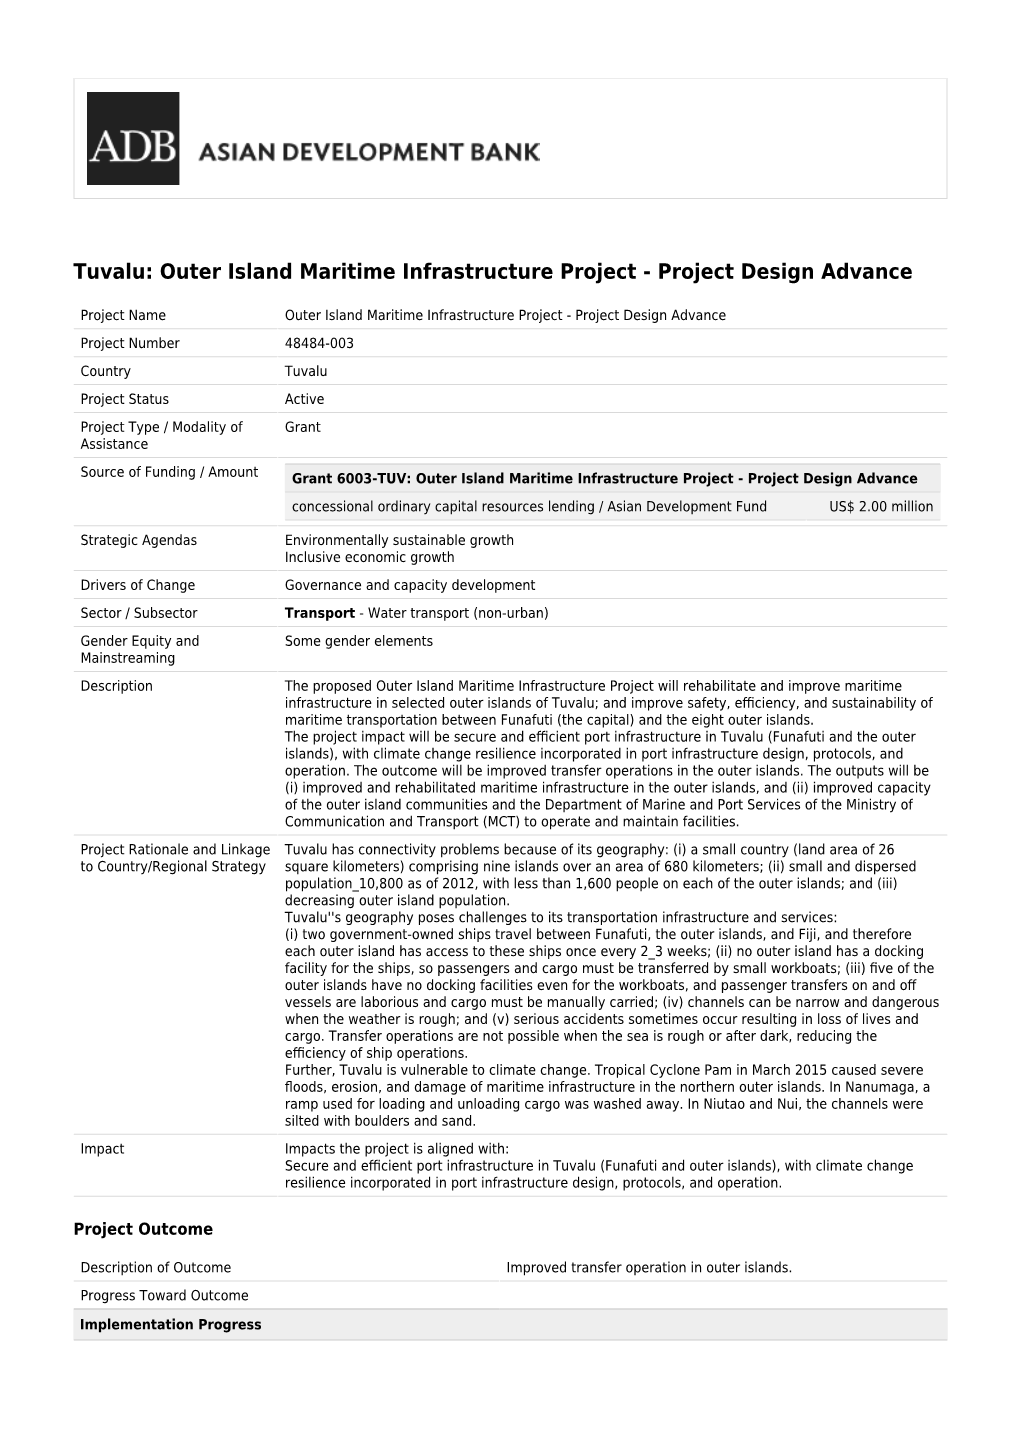 Outer Island Maritime Infrastructure Project - Project Design Advance